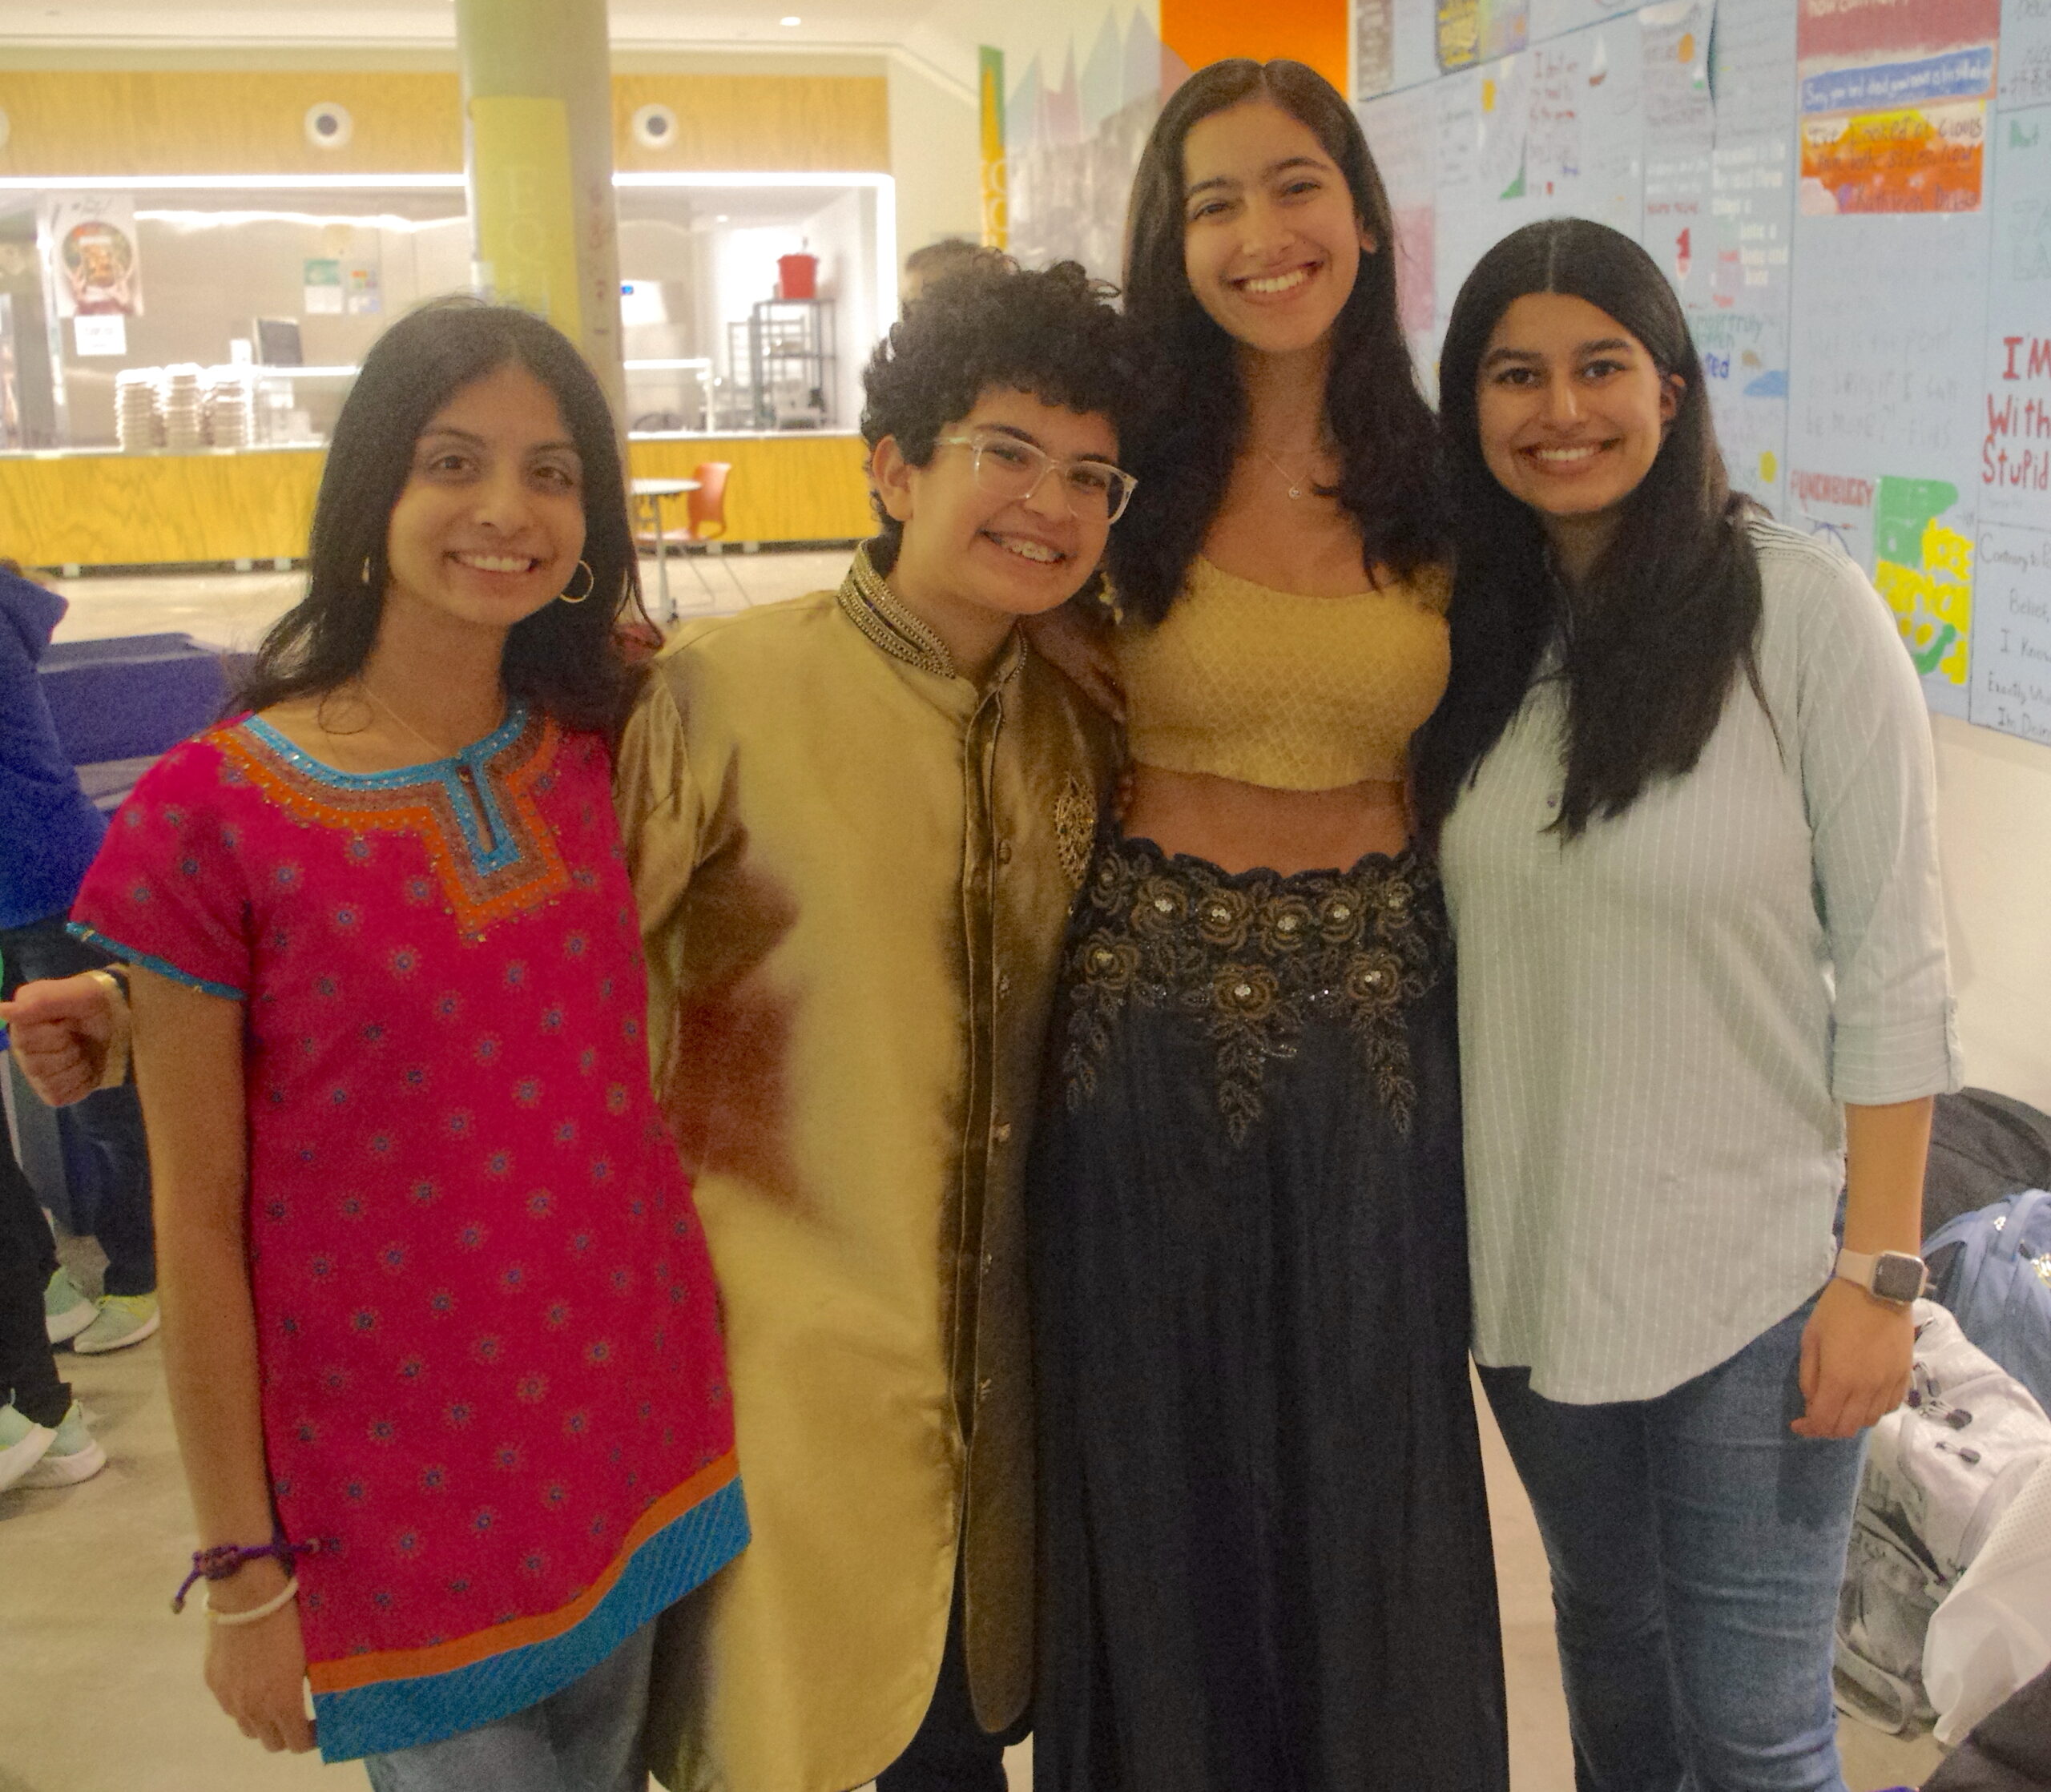 Students standing with friends in front of their culture display